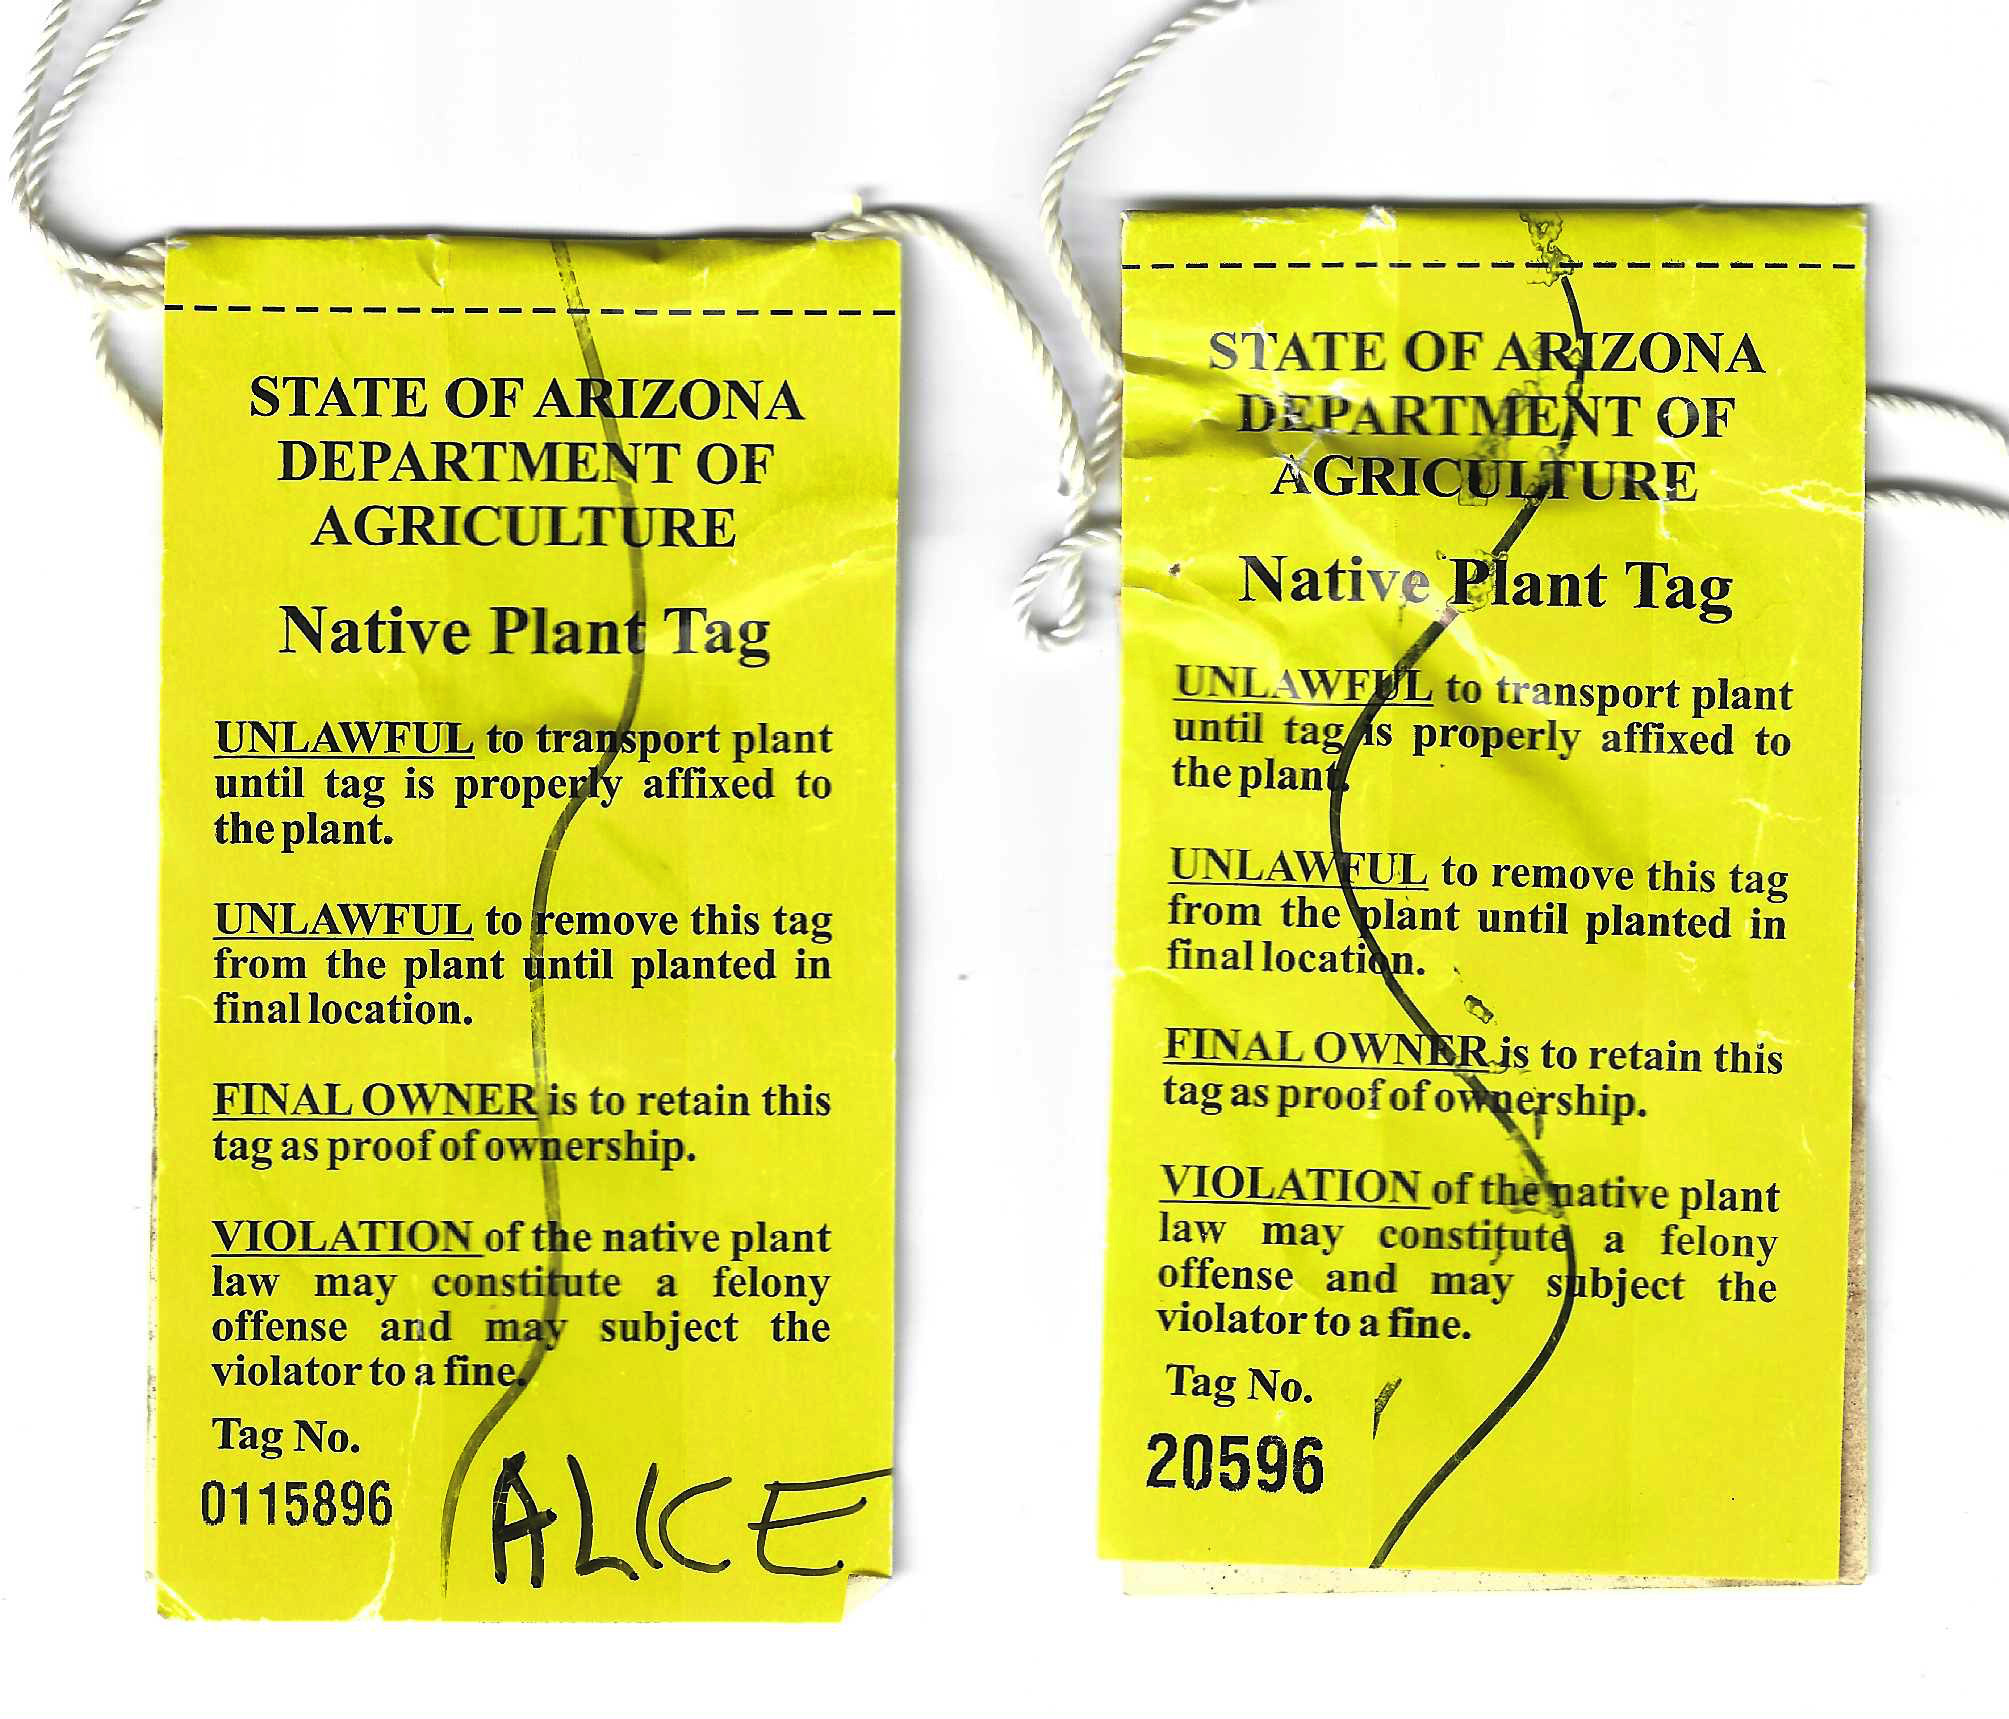 AZ native plant tags NPT44 native plant tag U F-VF, 2 tags with diff size serial numbers